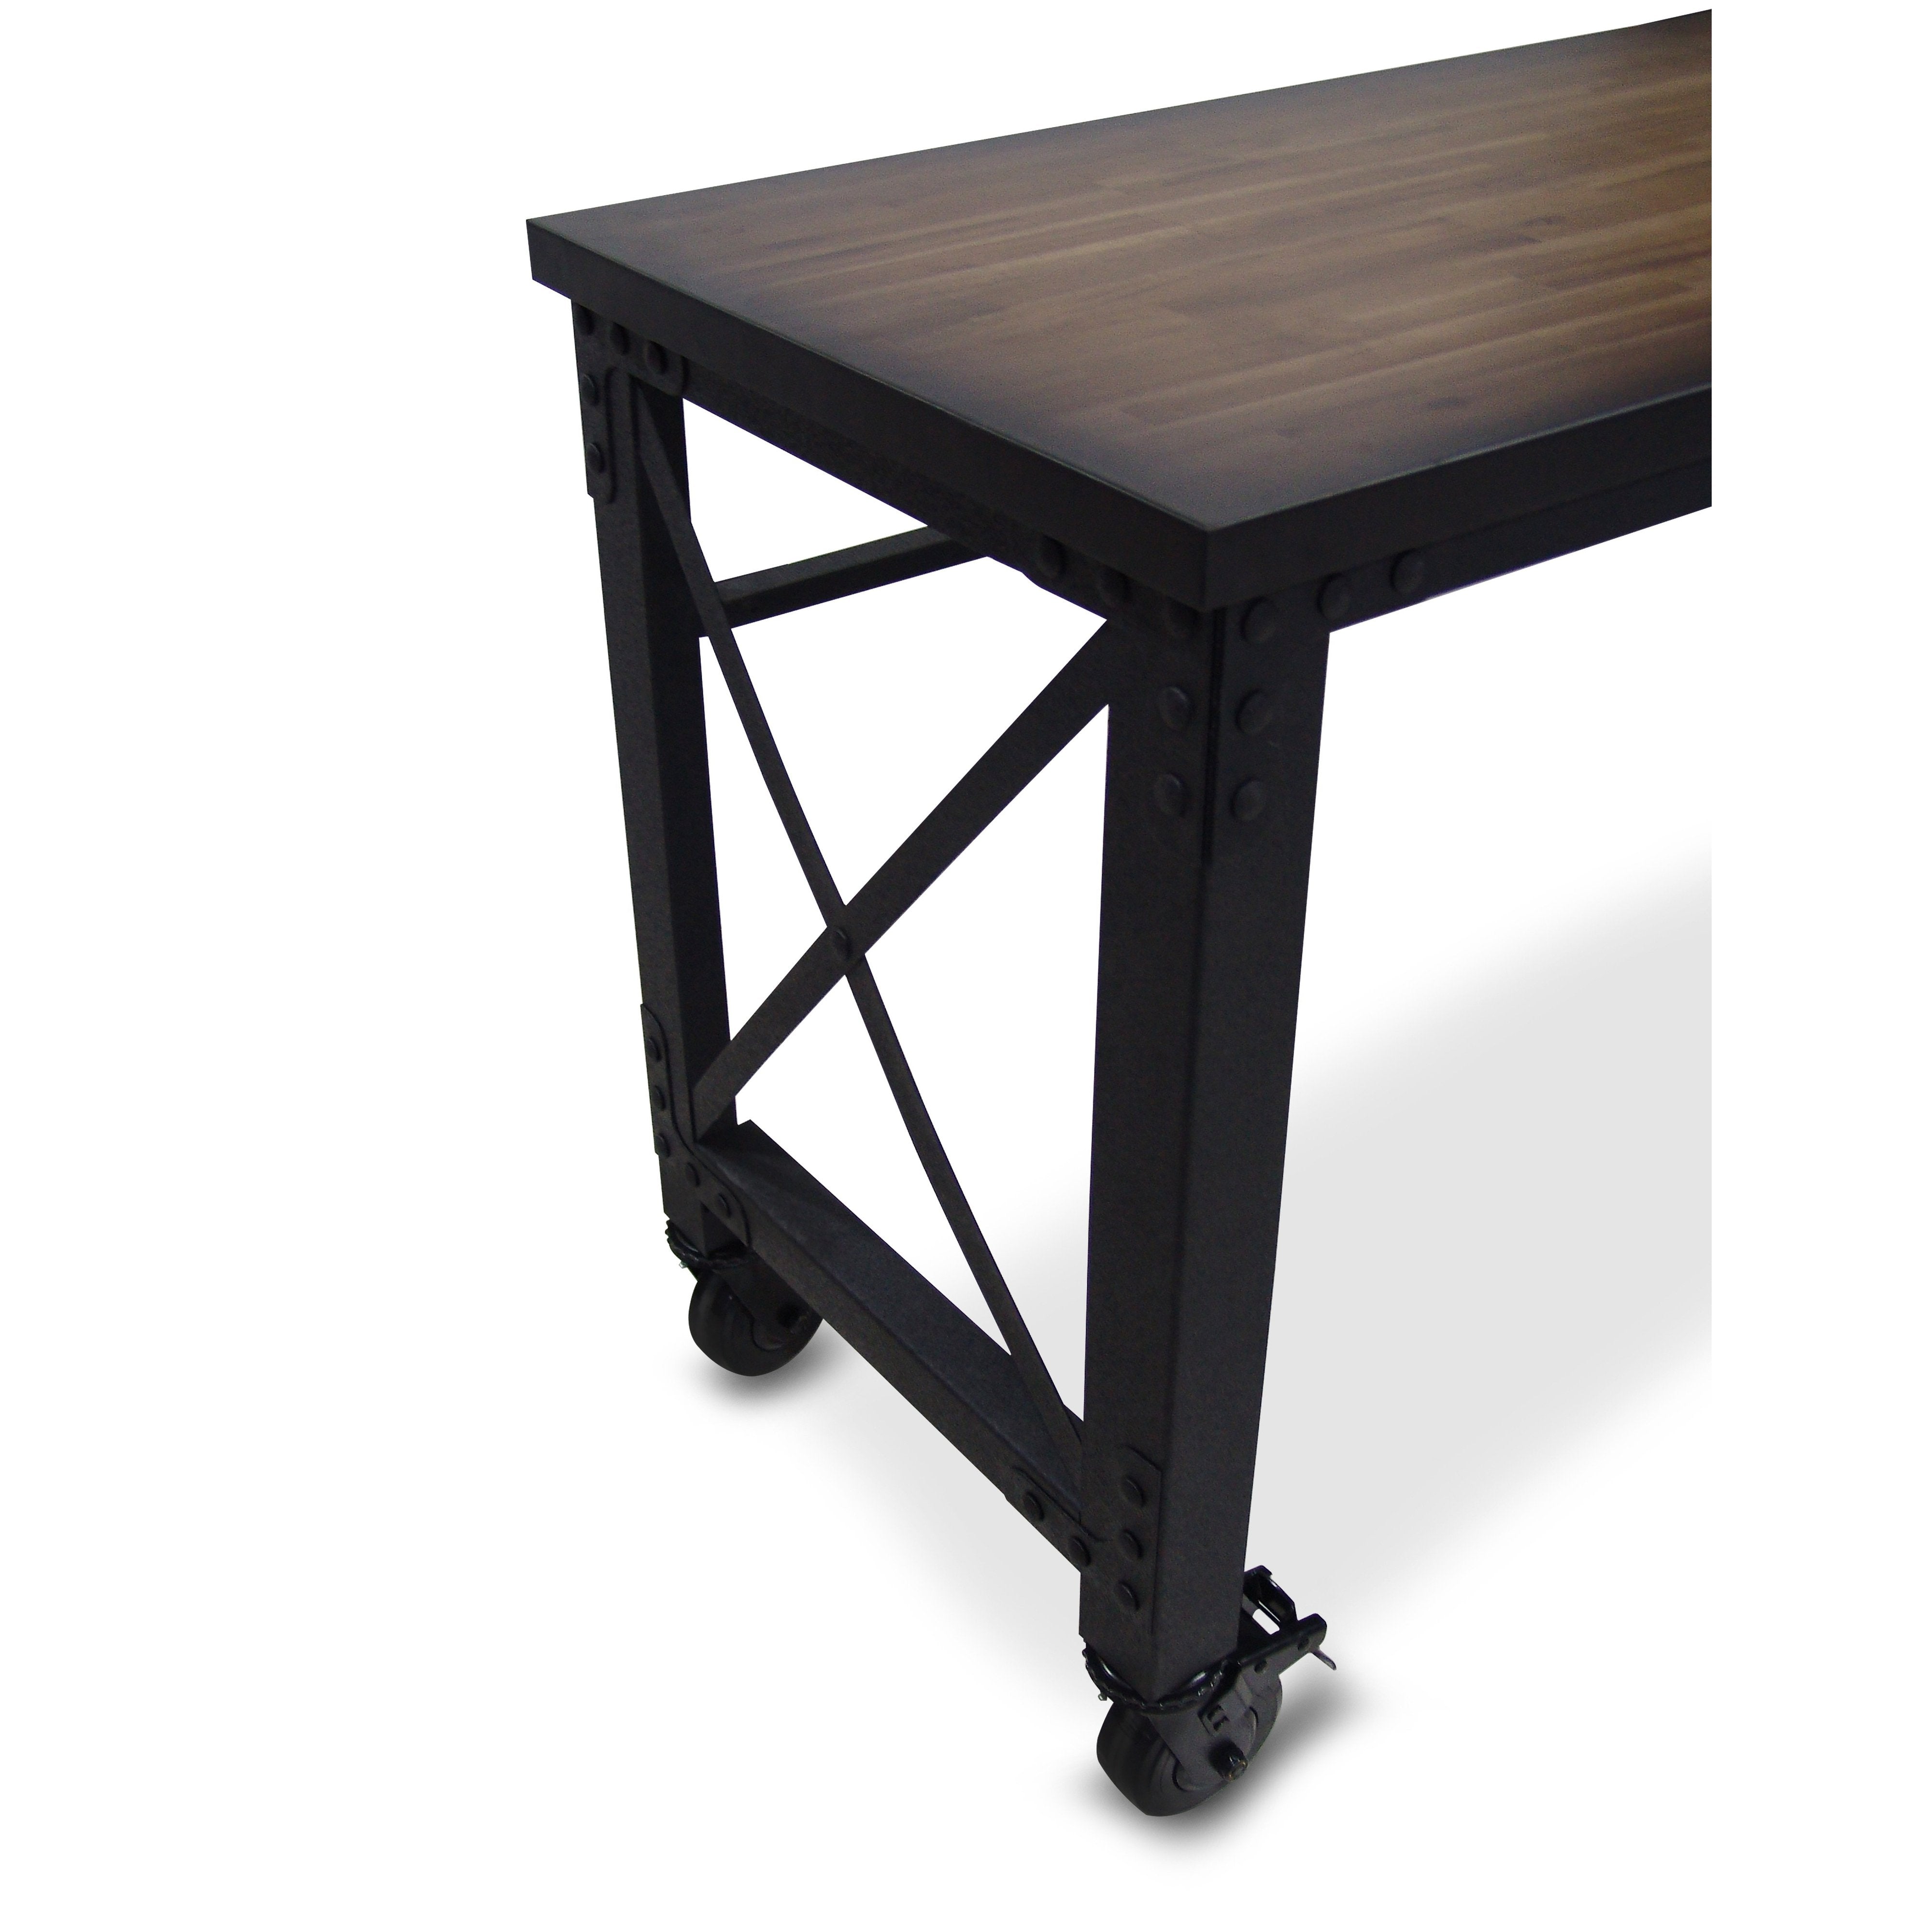 Durasheds furniture Duramax Rolling Industrial Desk with Wooden Top 62 Inches x 24 Inches